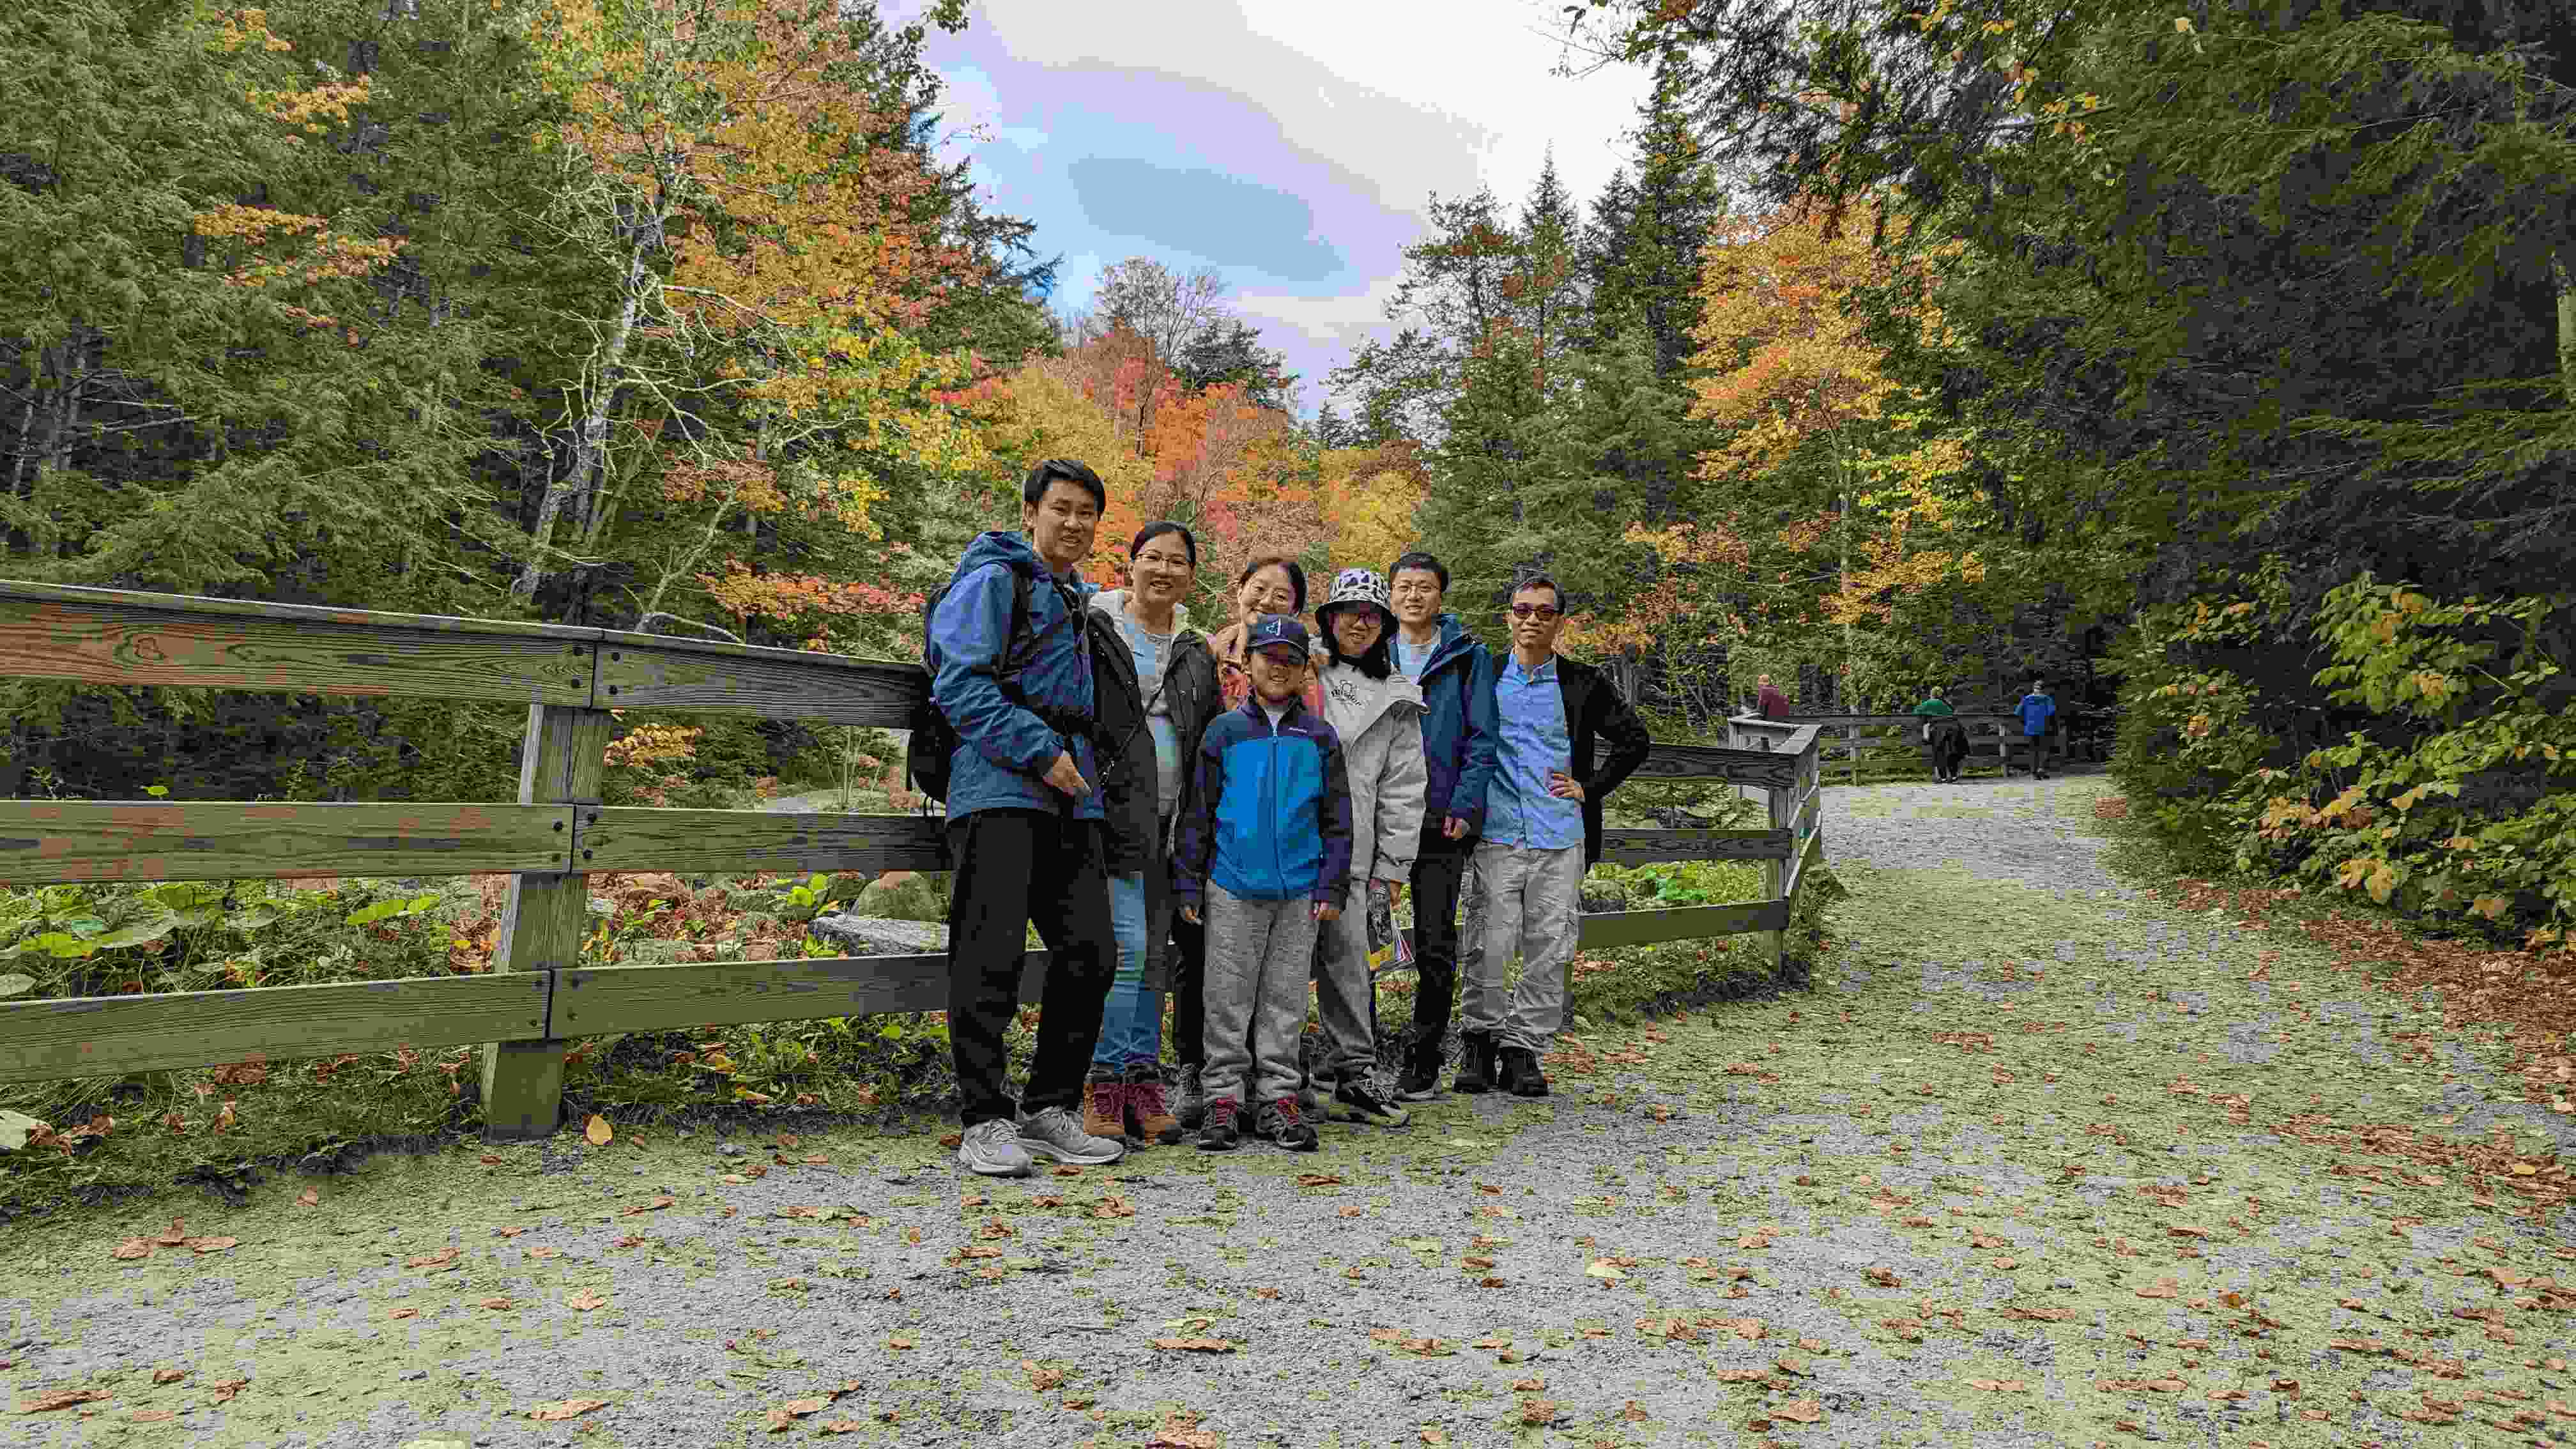 Six people stand in front of fall foliage, smiling for a group photo.